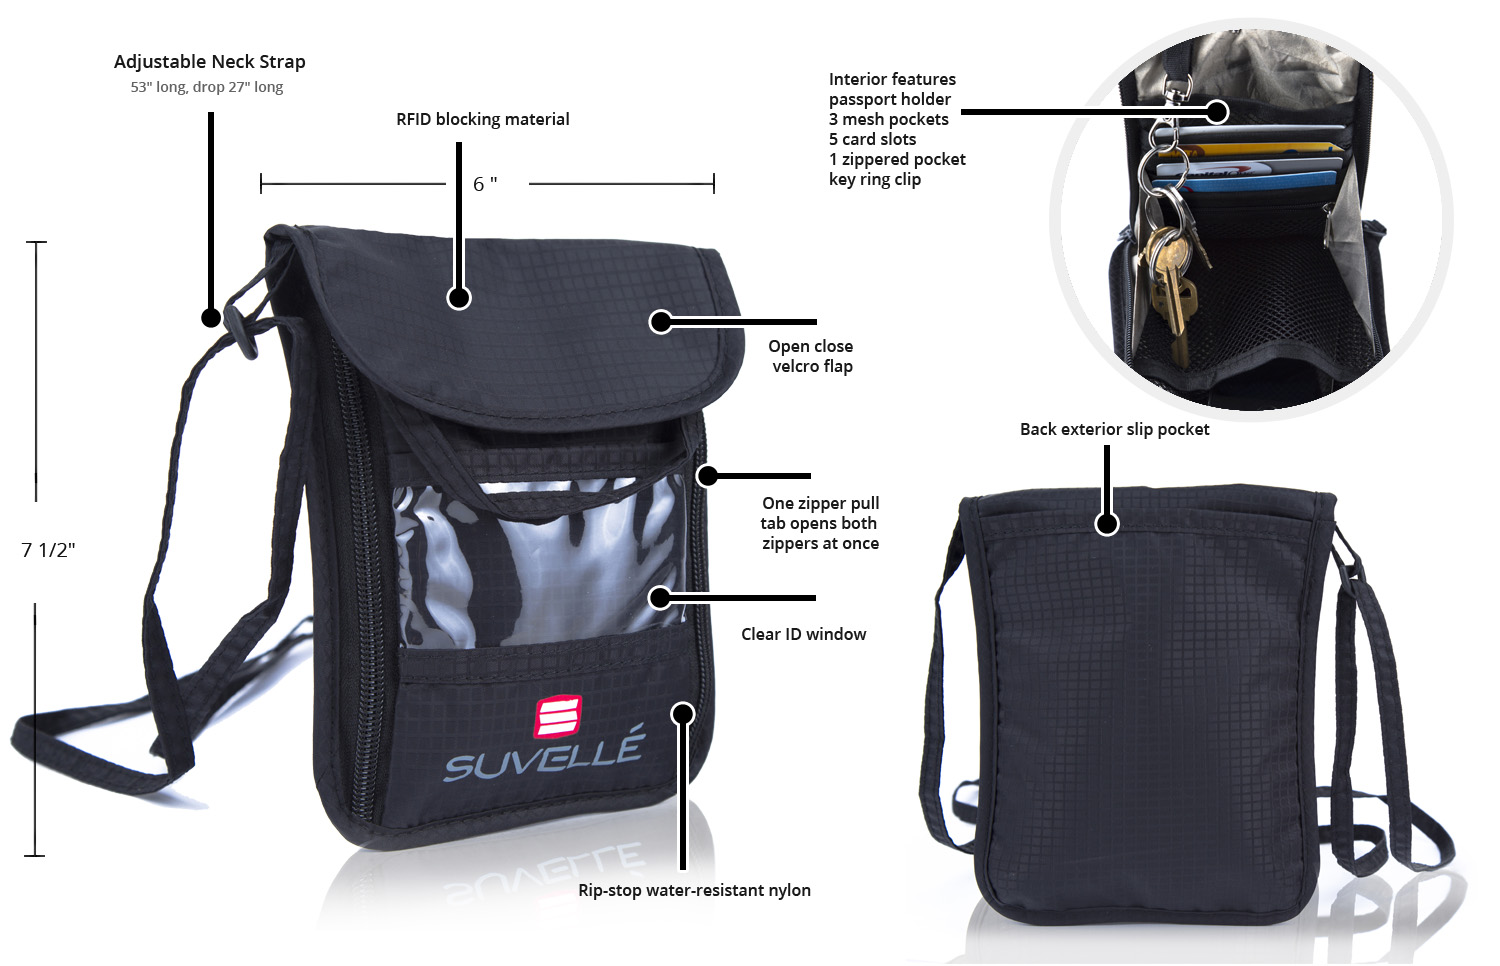 Suvelle RFID Blocking Travel Neck Stash Wallet Concealed Travel Pouch and Passport Holder - image 5 of 8